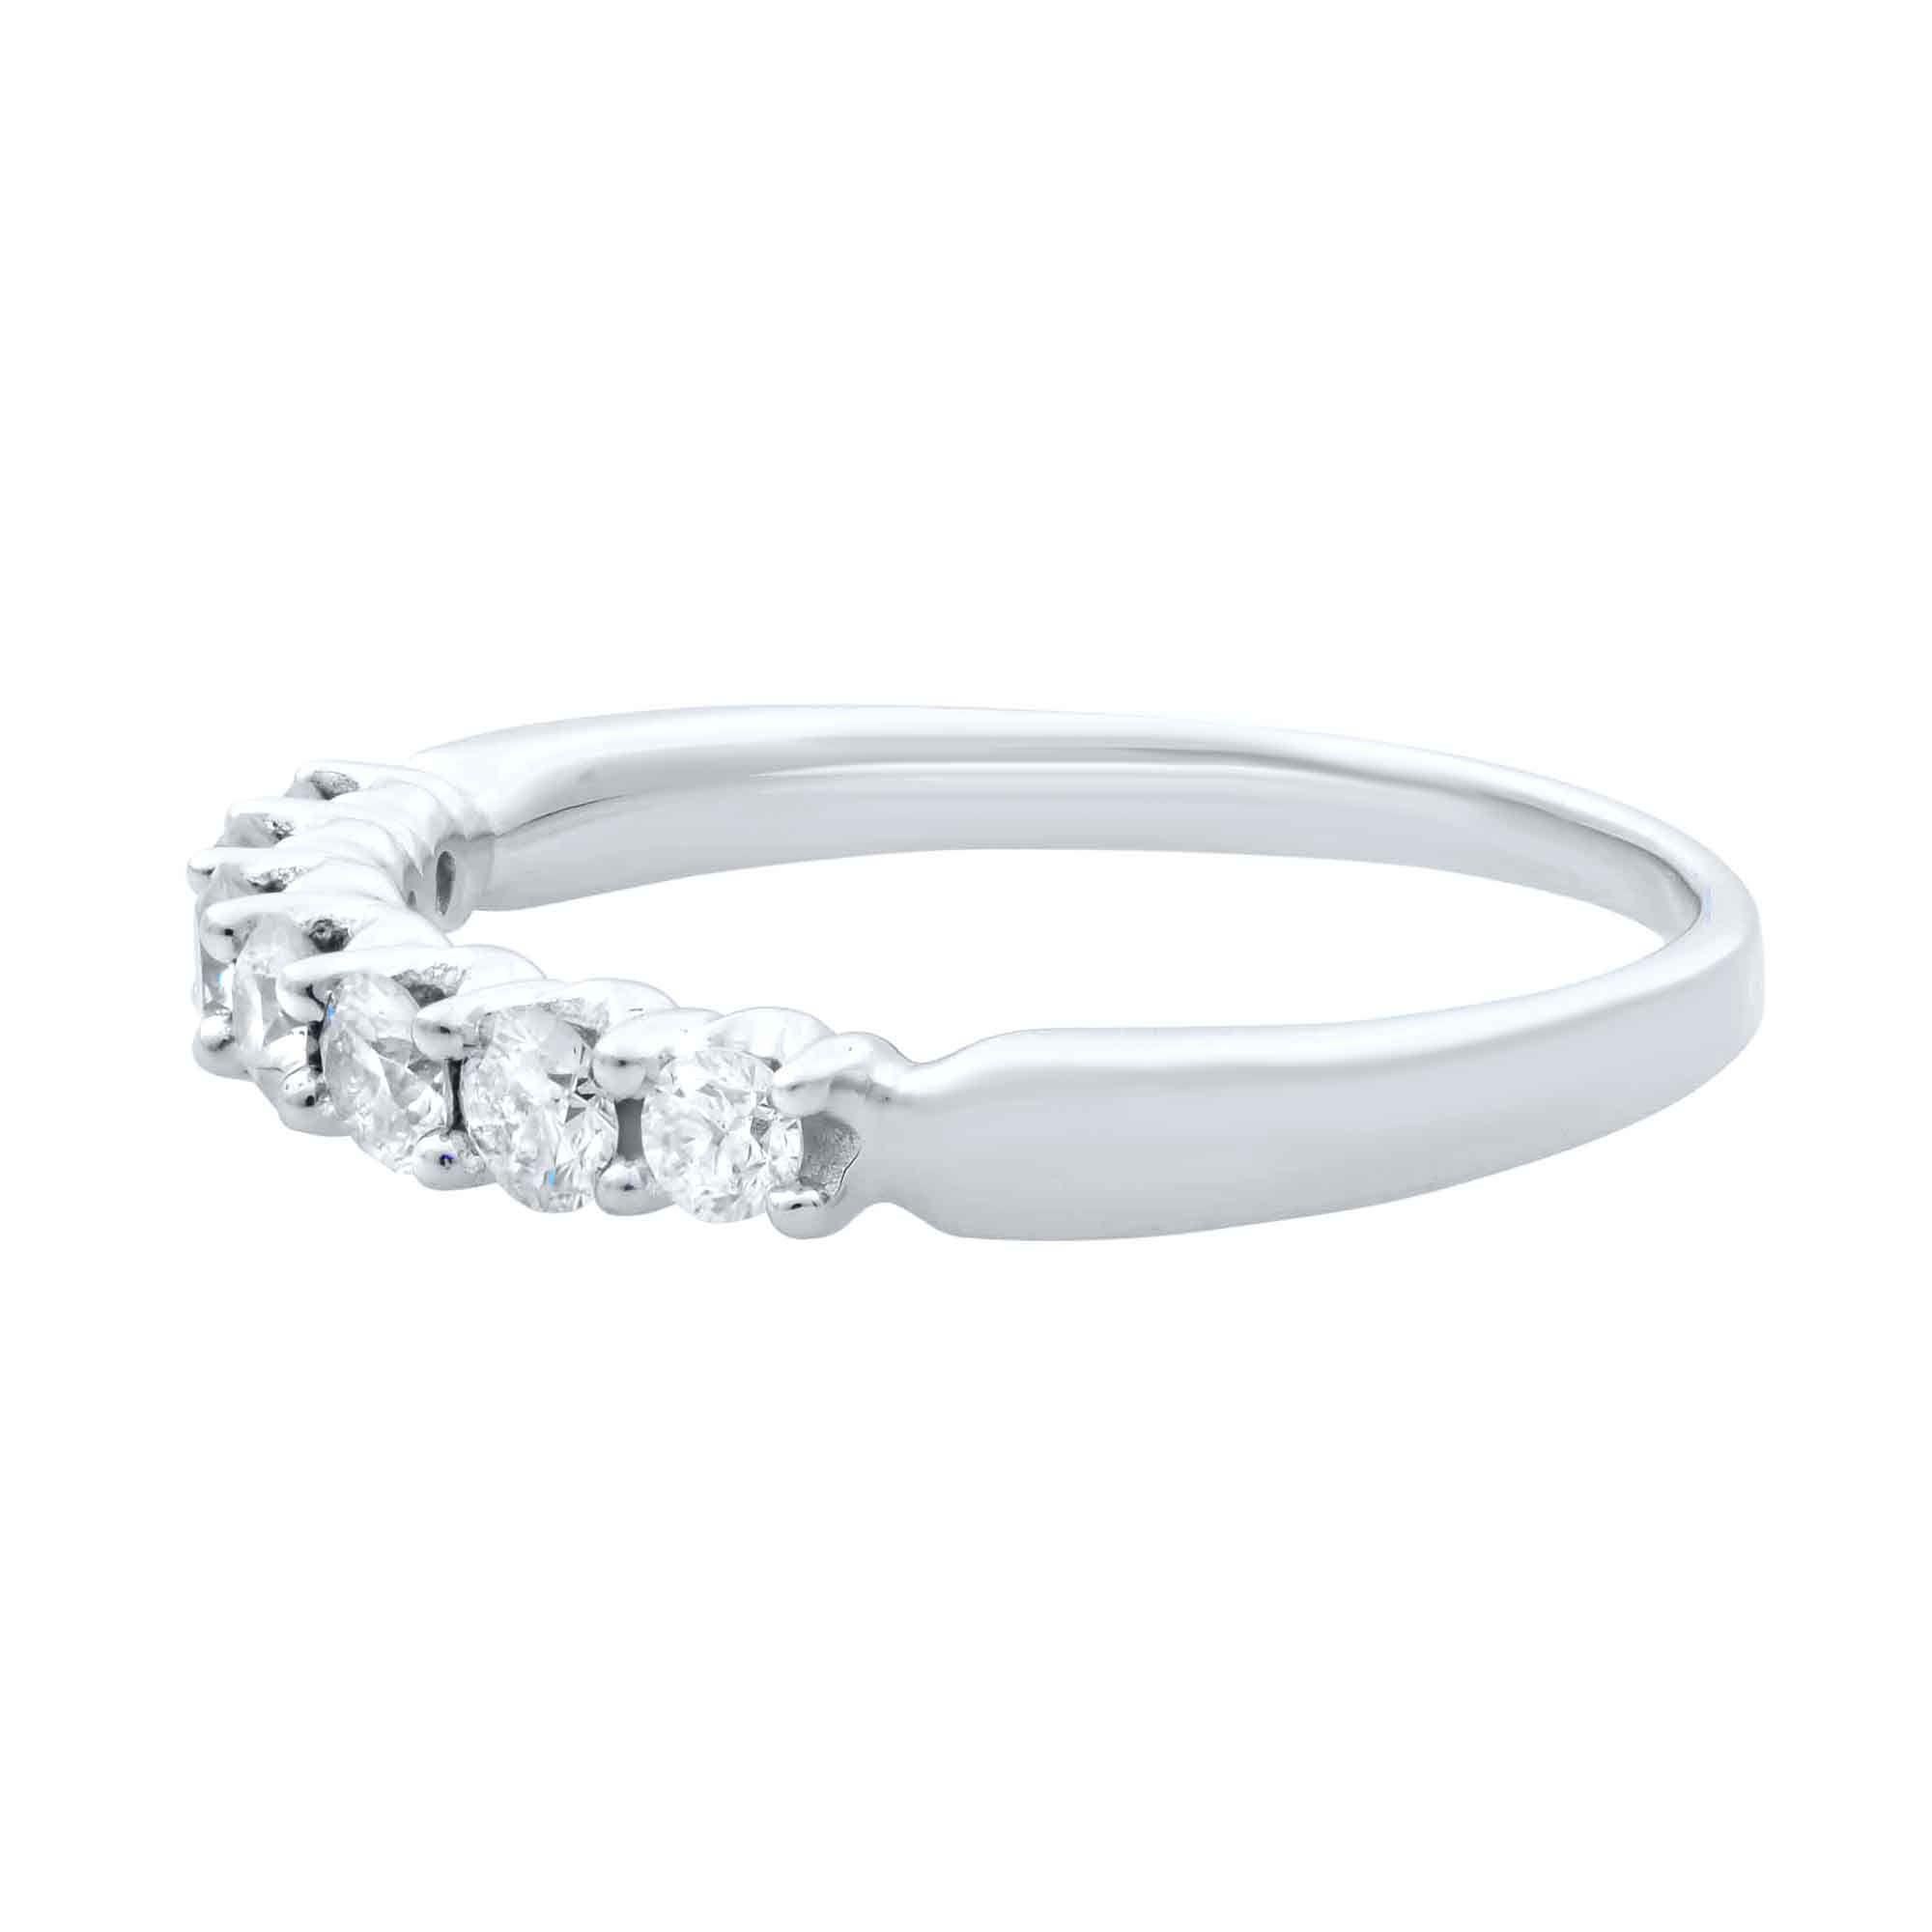 A seven sparkling round diamonds ring, secured in a four prong setting on a 14k white gold band. Exhibiting a half eternity design, this timeless wedding band symbolizes eternal love. The total diamond carat weight is 0.42ct. Diamonds are SI1